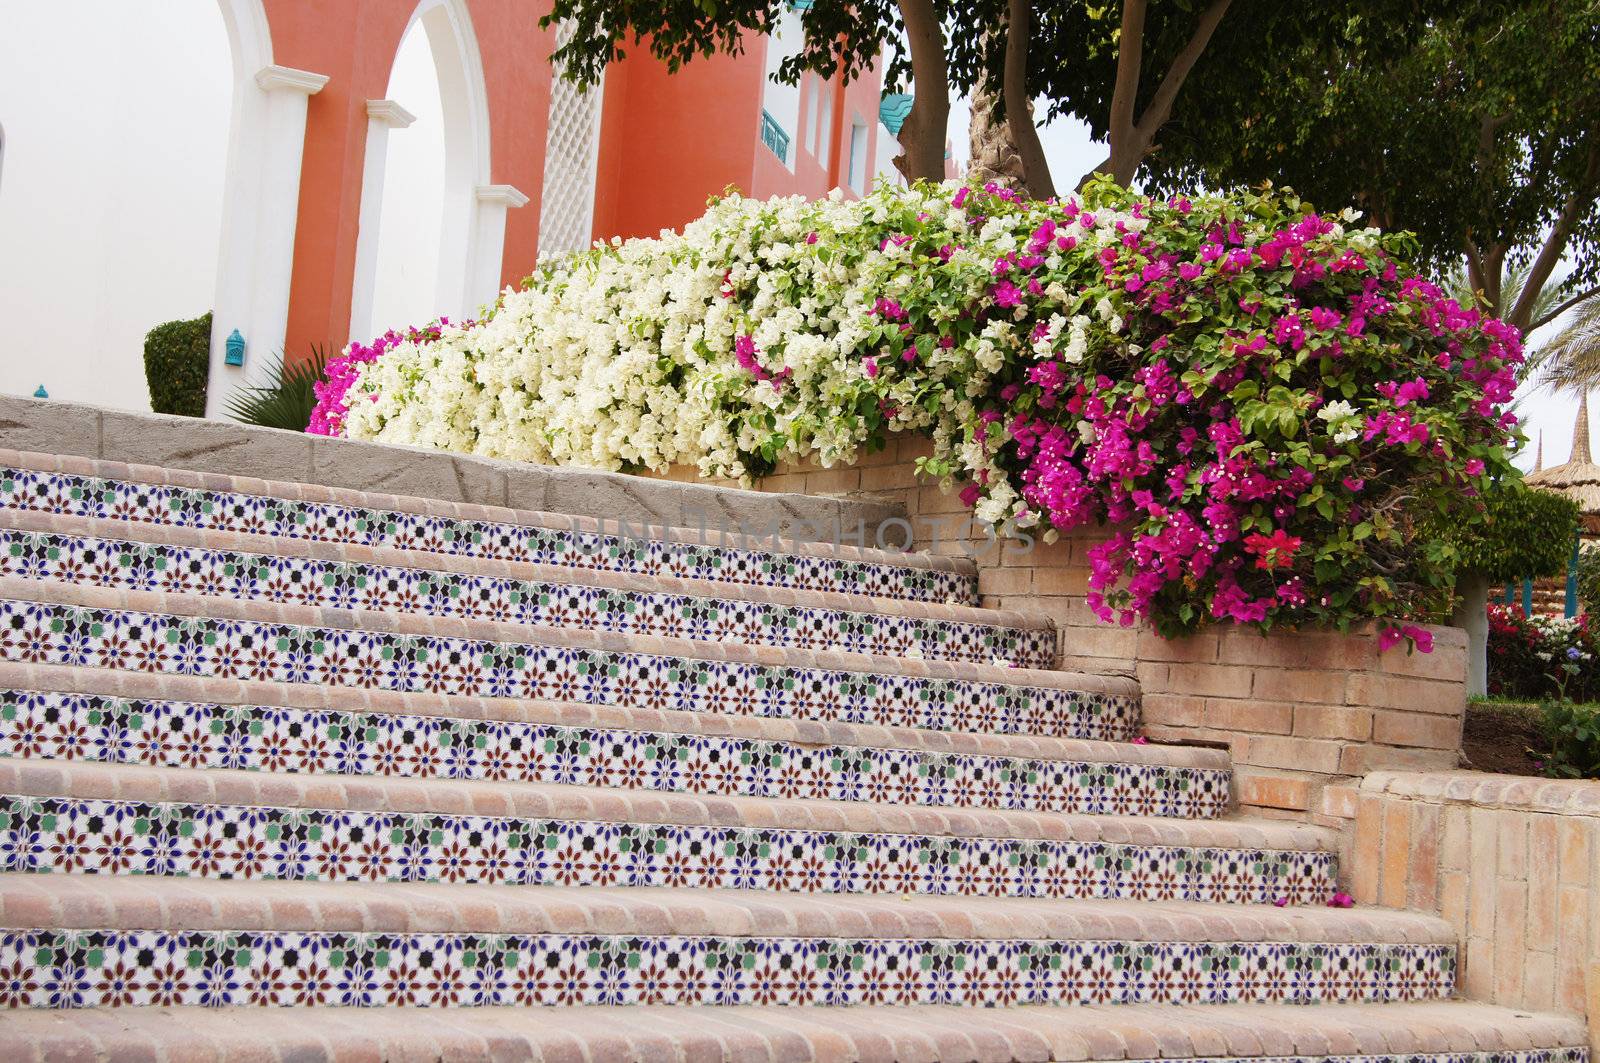 Courtyard of mediterranean villa with ceramic tile walkway and blooming bushes in Egypt     